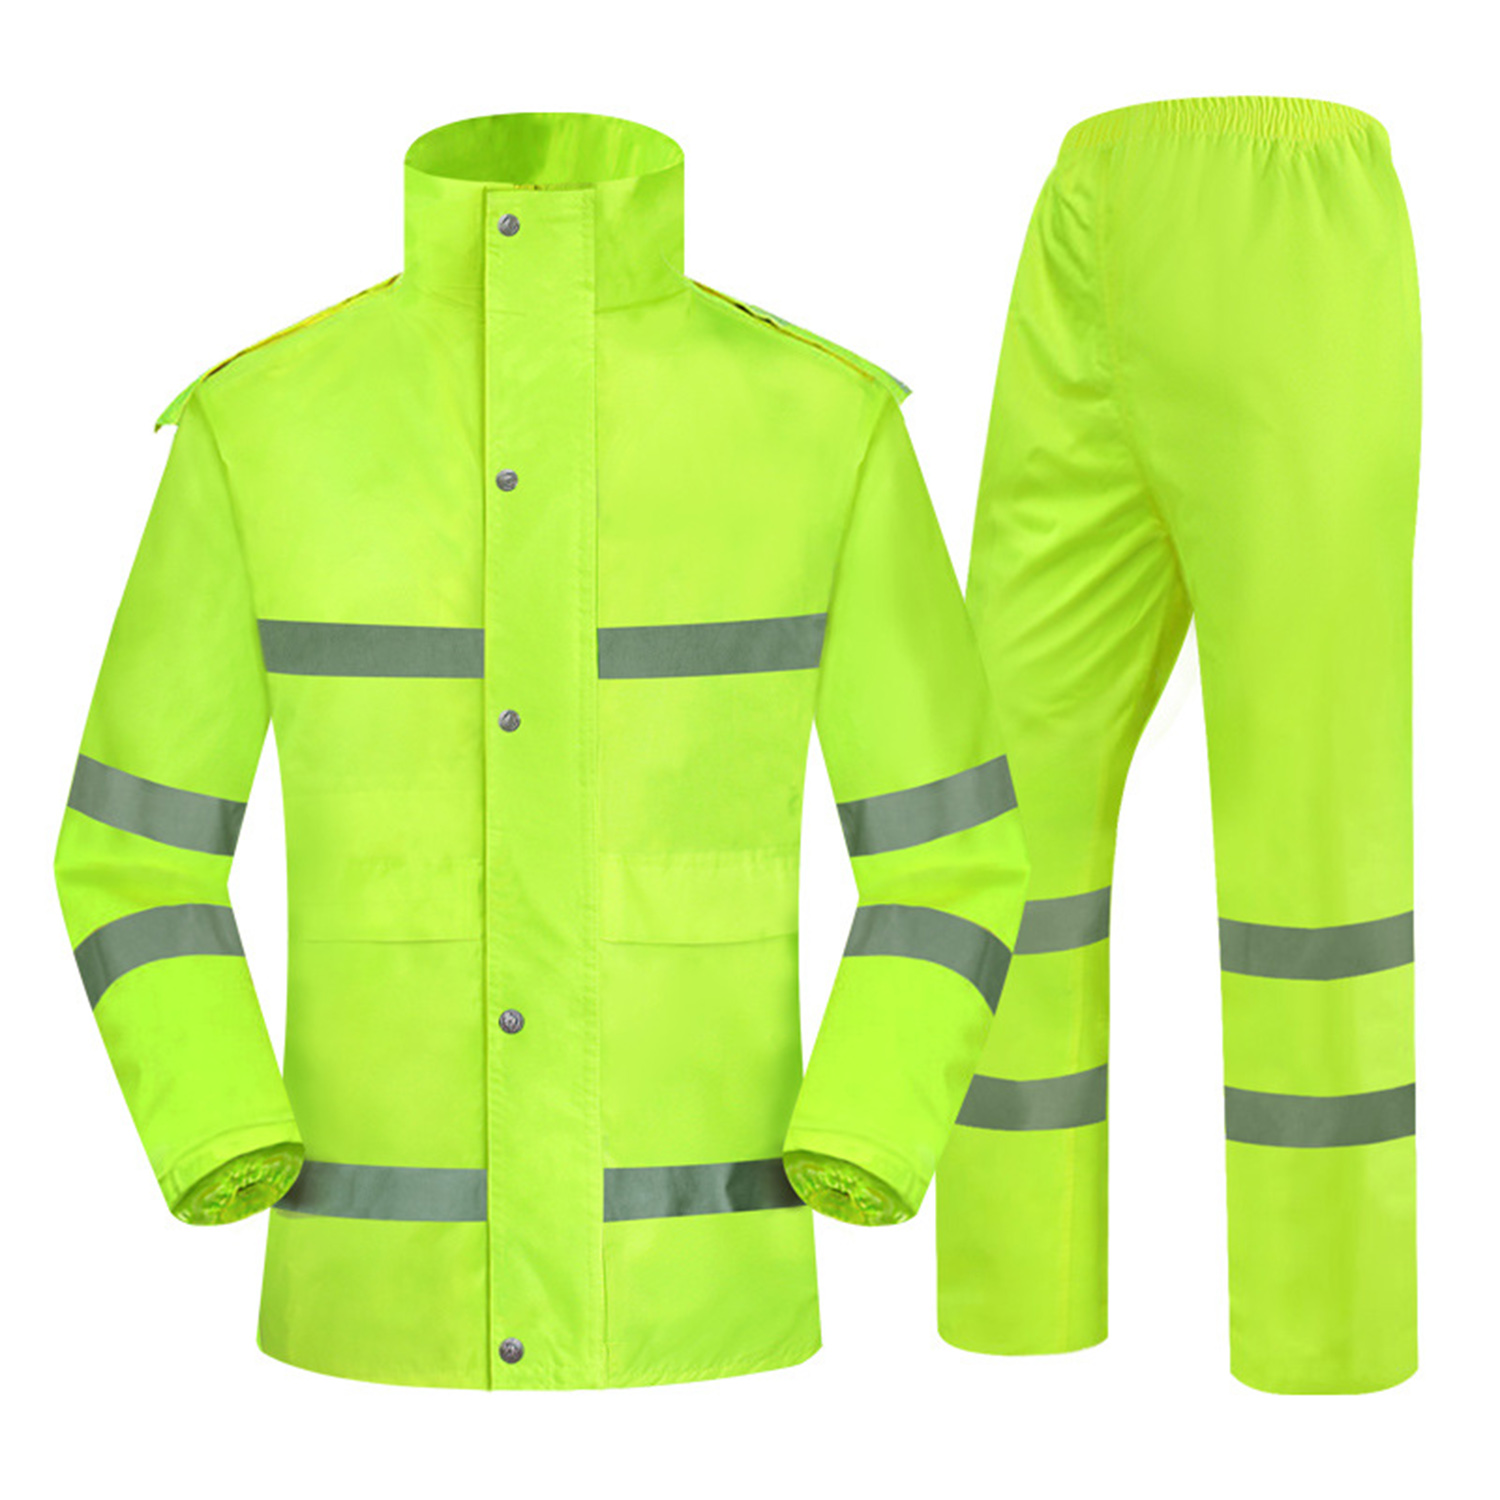 Reflective Raincoat Highlighted Safety Model ZX-506